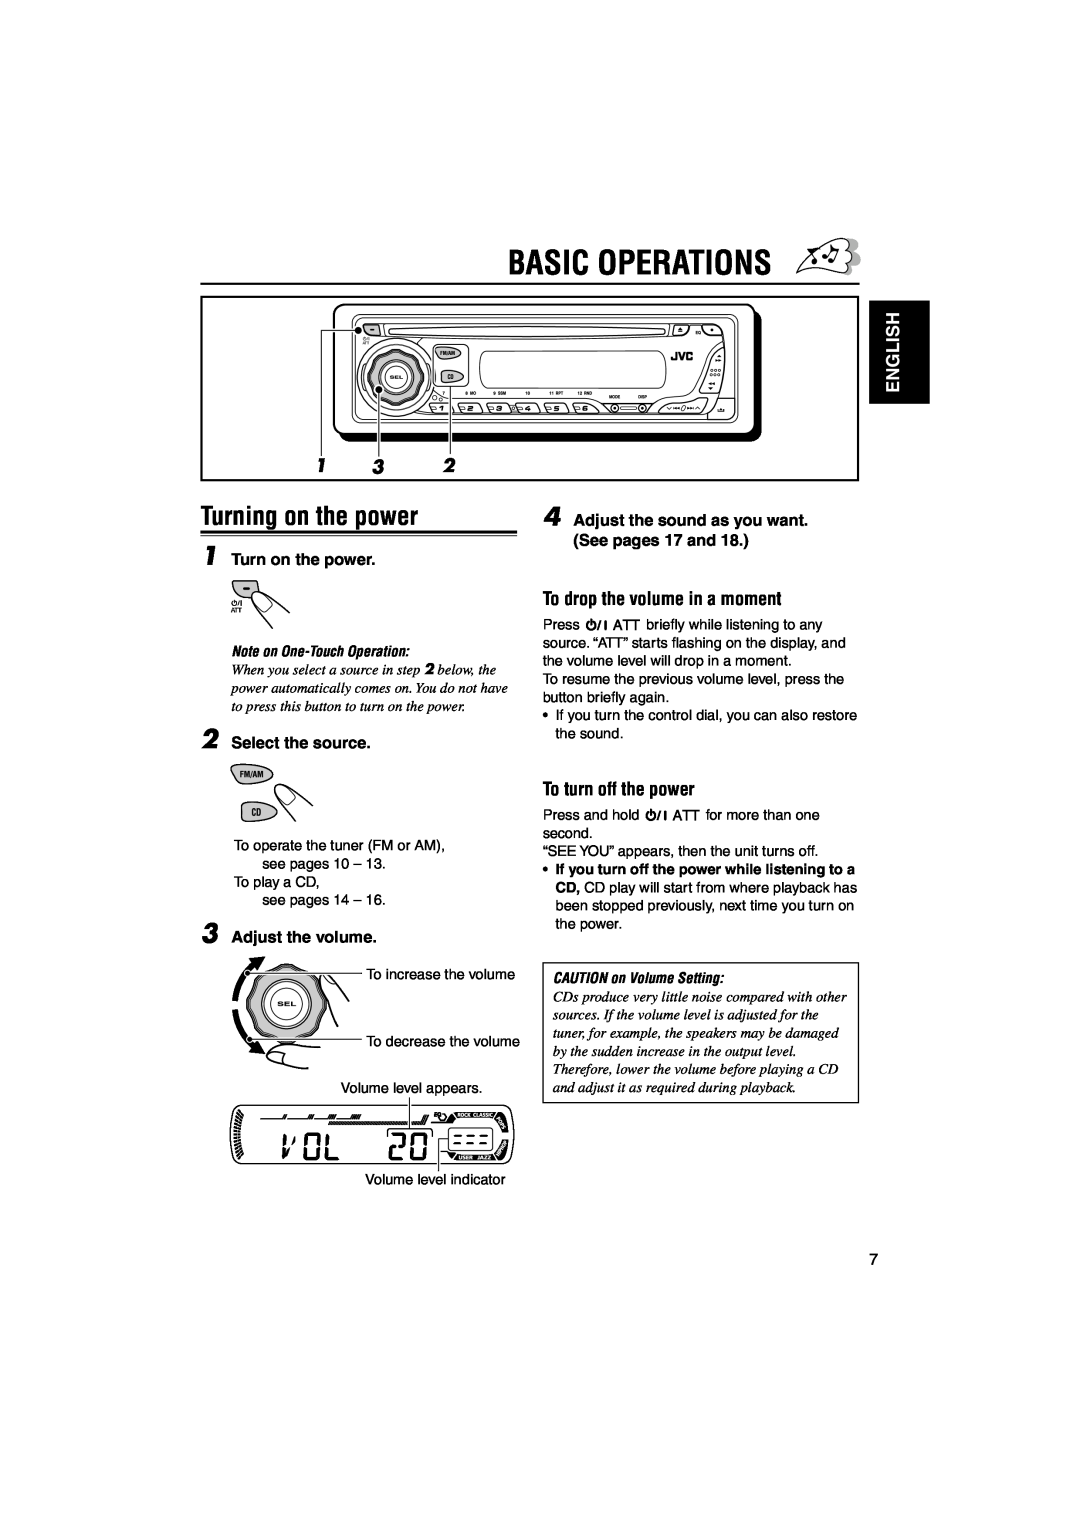 JVC KD-G210 manual Basic Operations, Turning on the power, To drop the volume in a moment, To turn off the power, English 